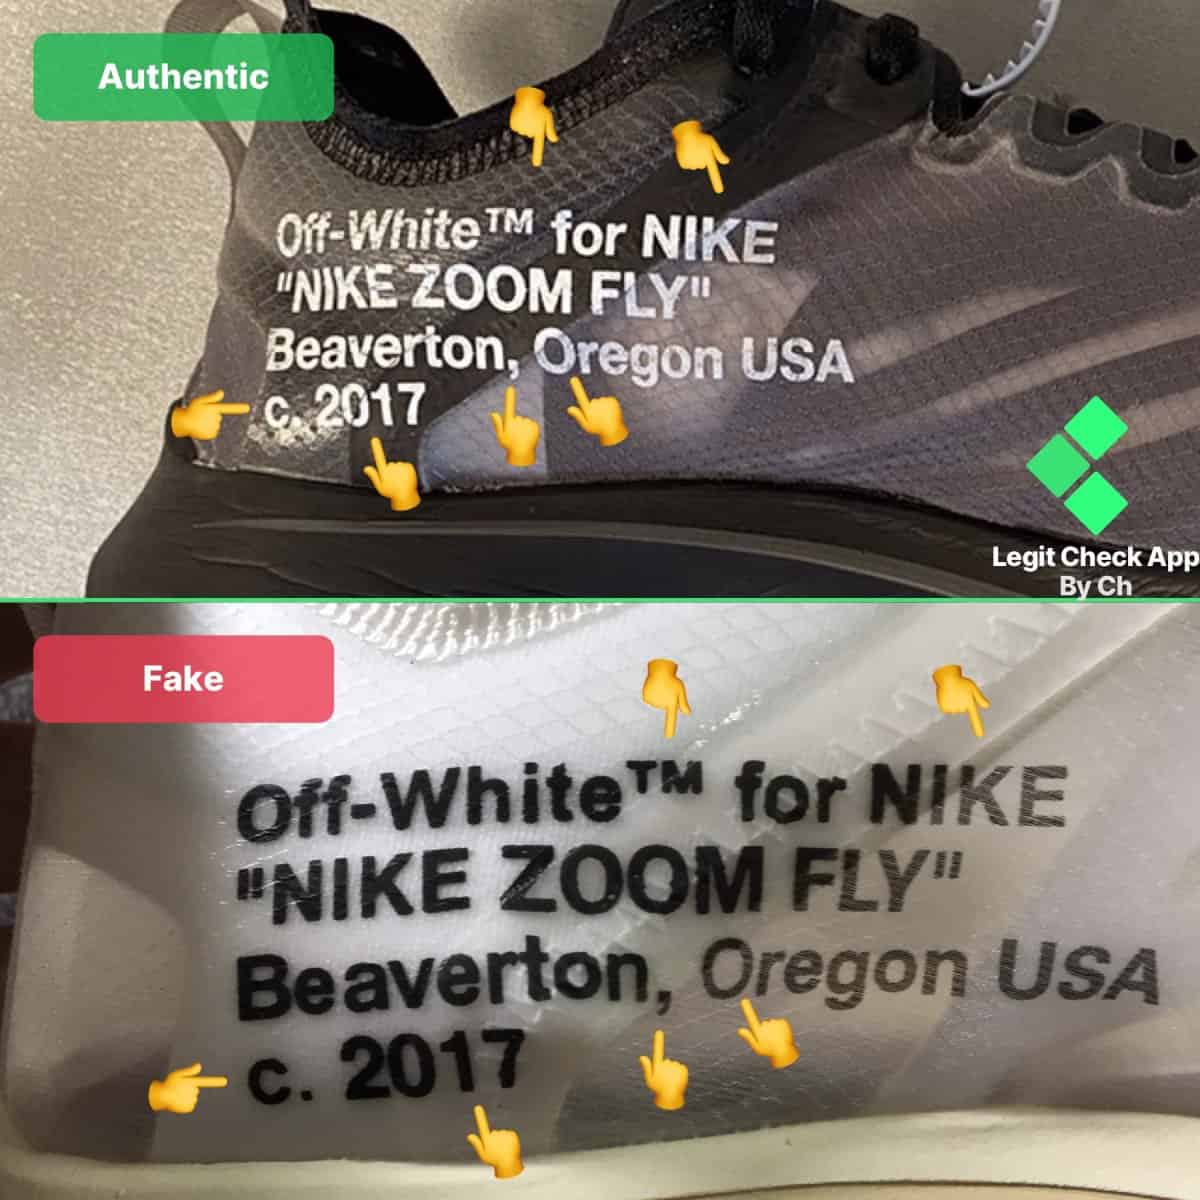 How To Spot Fake Off-White Nike Zoom 